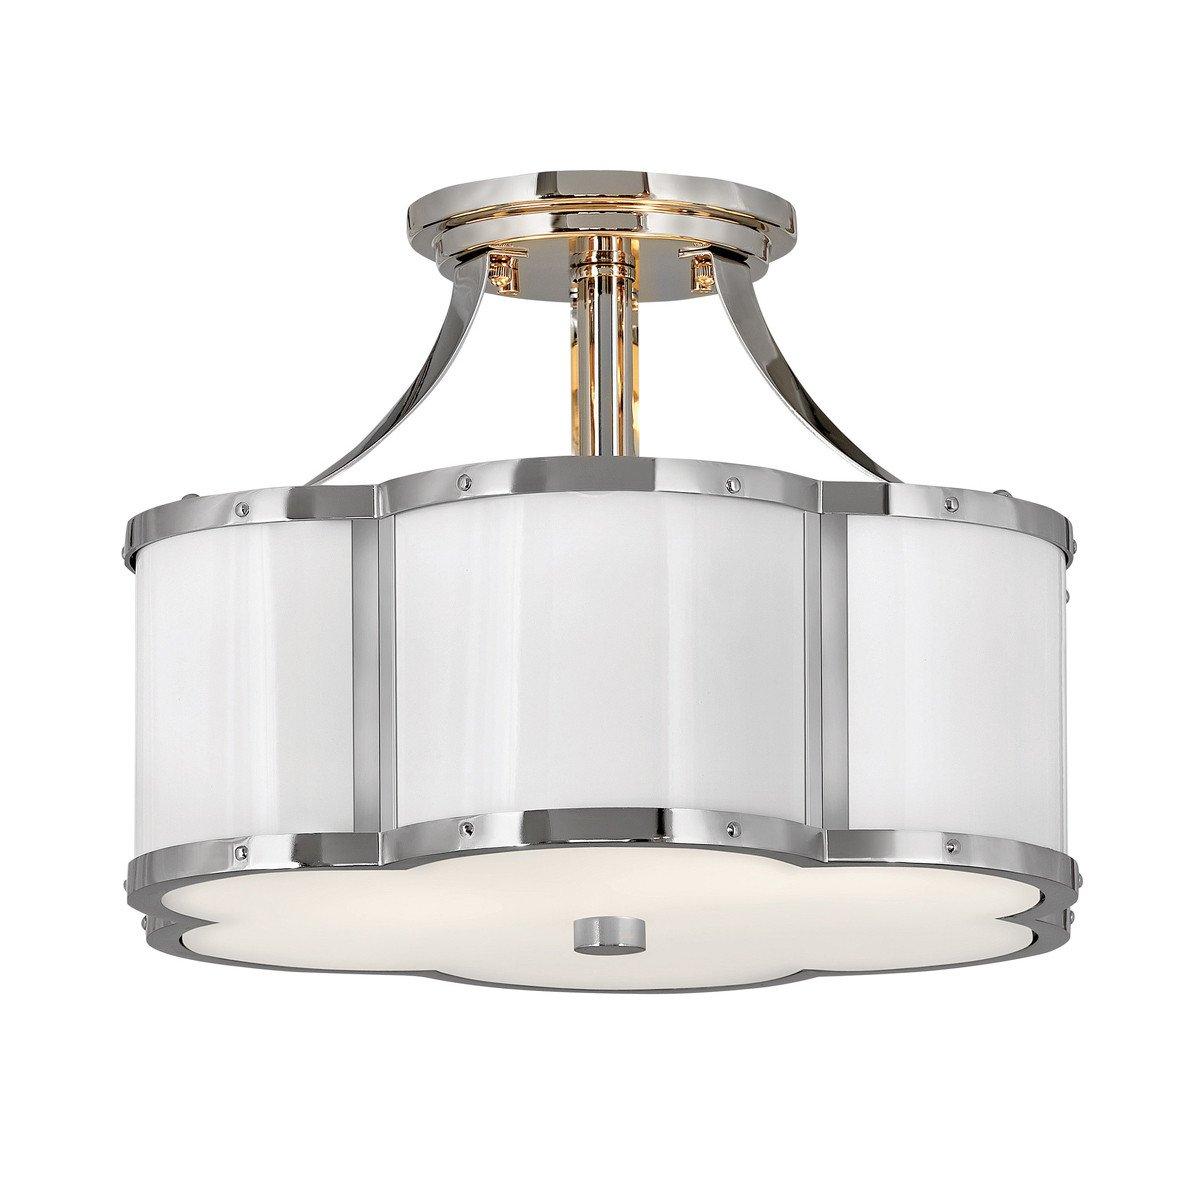 Hinkley Chance Cylindrical Ceiling Light Polished Nickel with Polished White